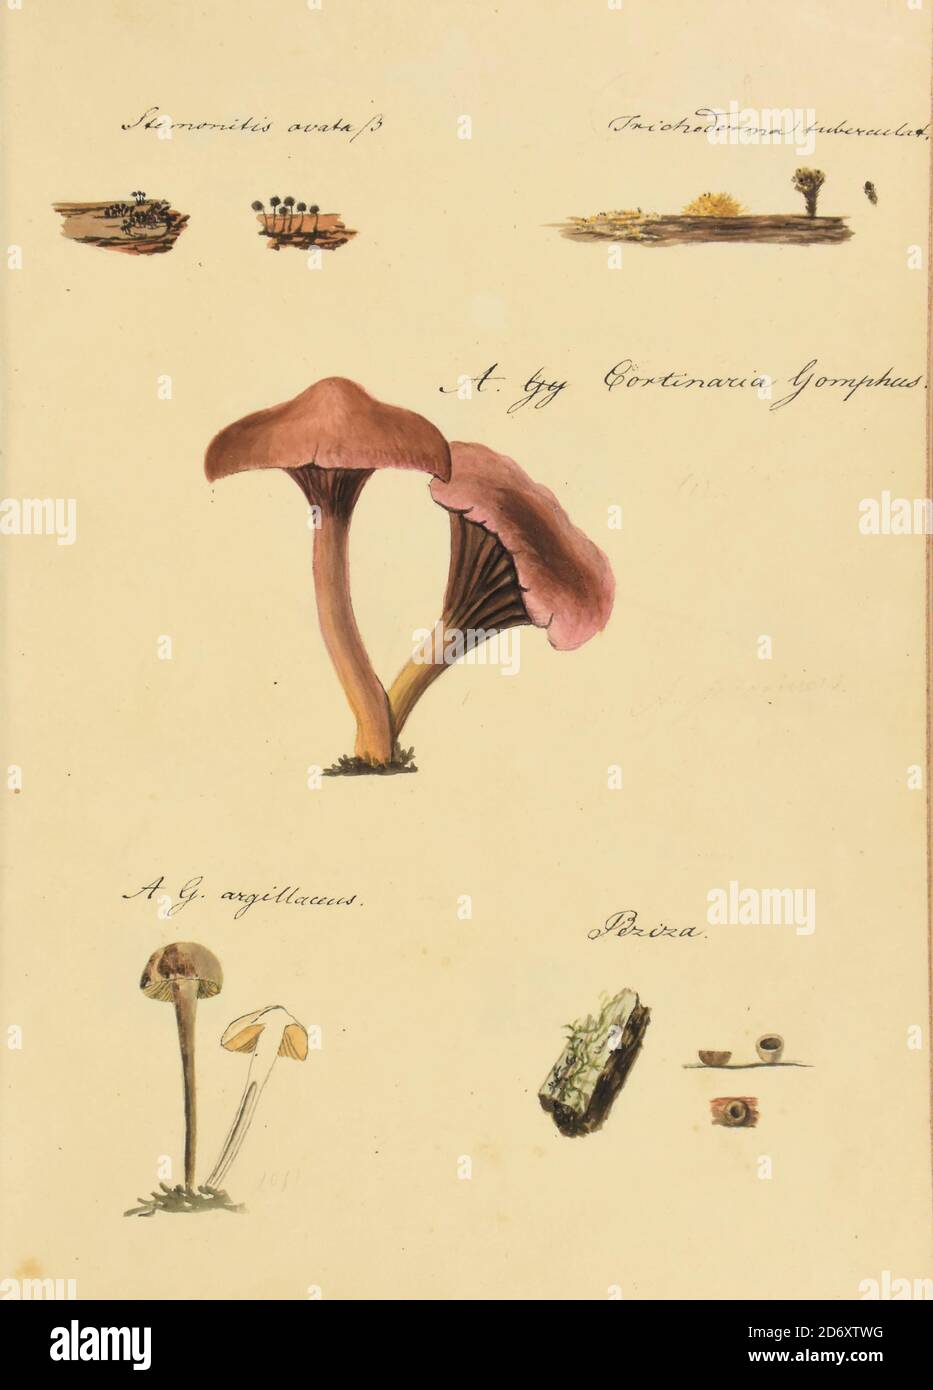 Hand Painted illustration of North American Fungi from the book 'Icones fungorum Niskiensium' by Schweinitz, Lewis David von, 1780-1834 Publication date 1805. Lewis David de Schweinitz (13 February 1780 – 8 February 1834) was a German-American botanist and mycologist. He is considered by some the 'Father of North American Mycology', but also made significant contributions to botany. Stock Photo